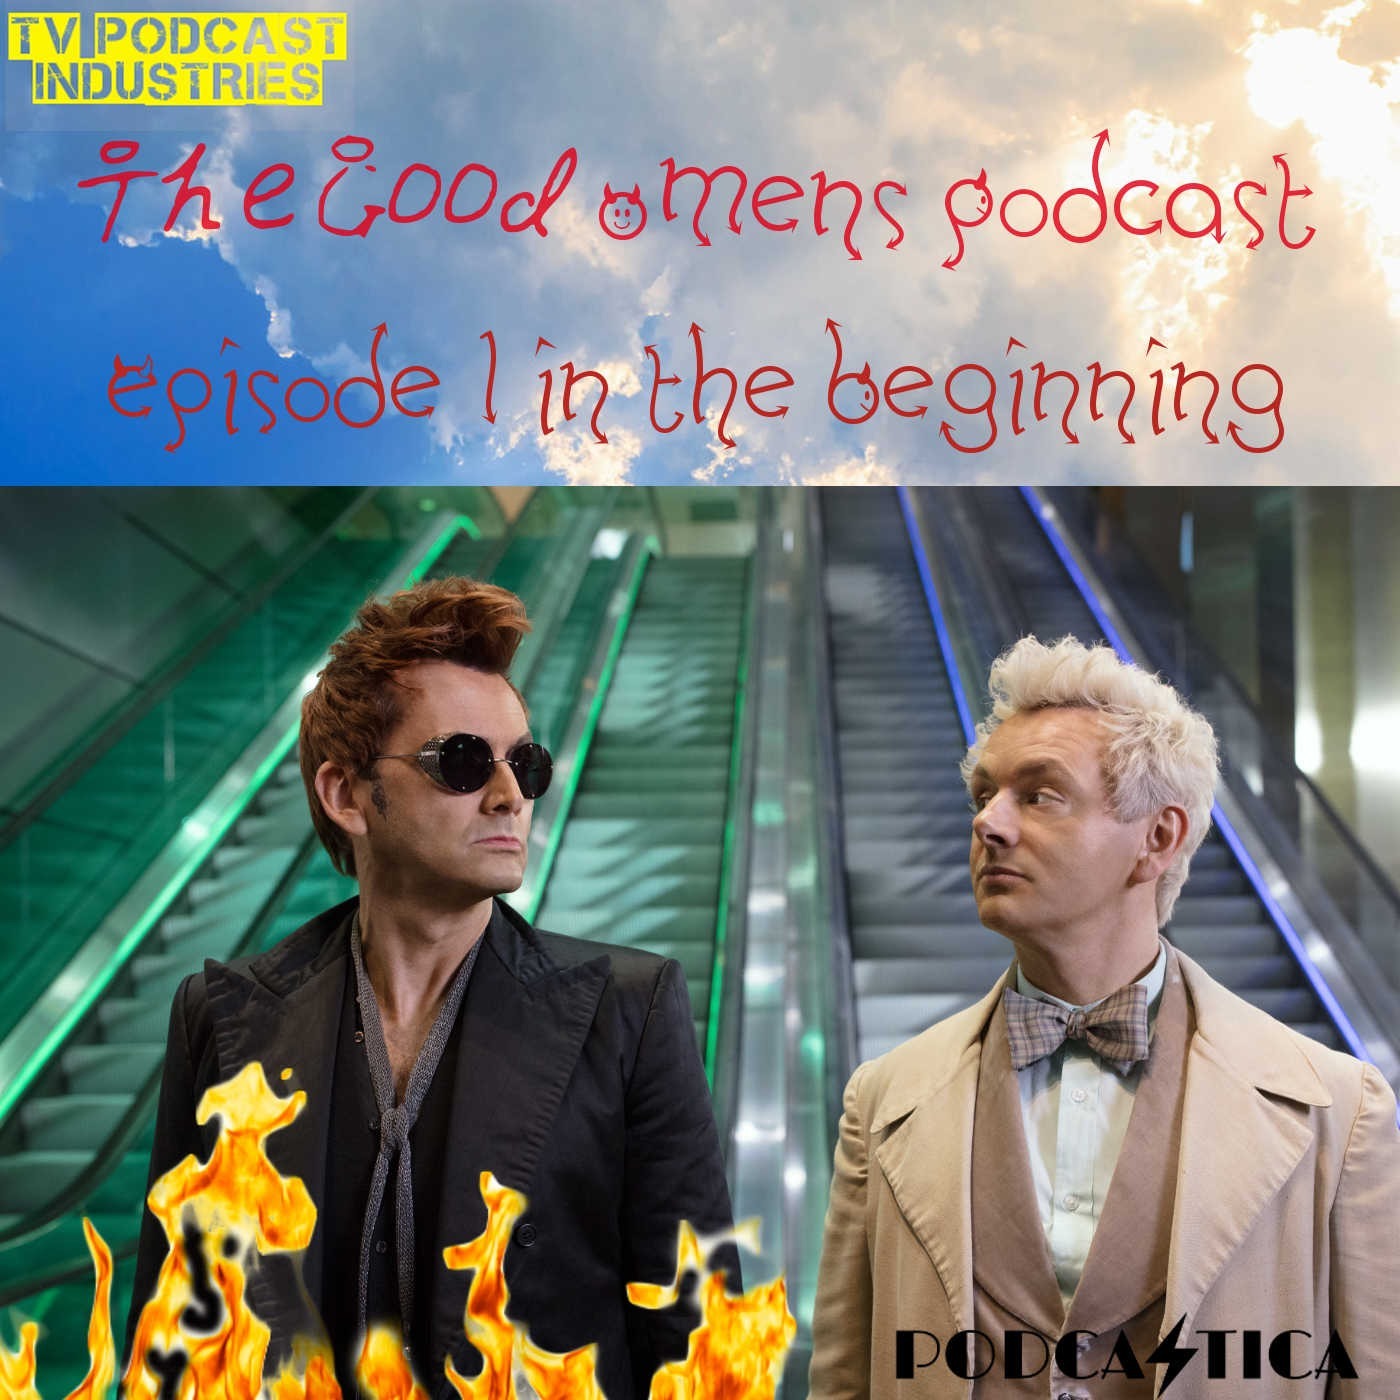 Good Omens Episode 1 Podcast about "In The Beginning"